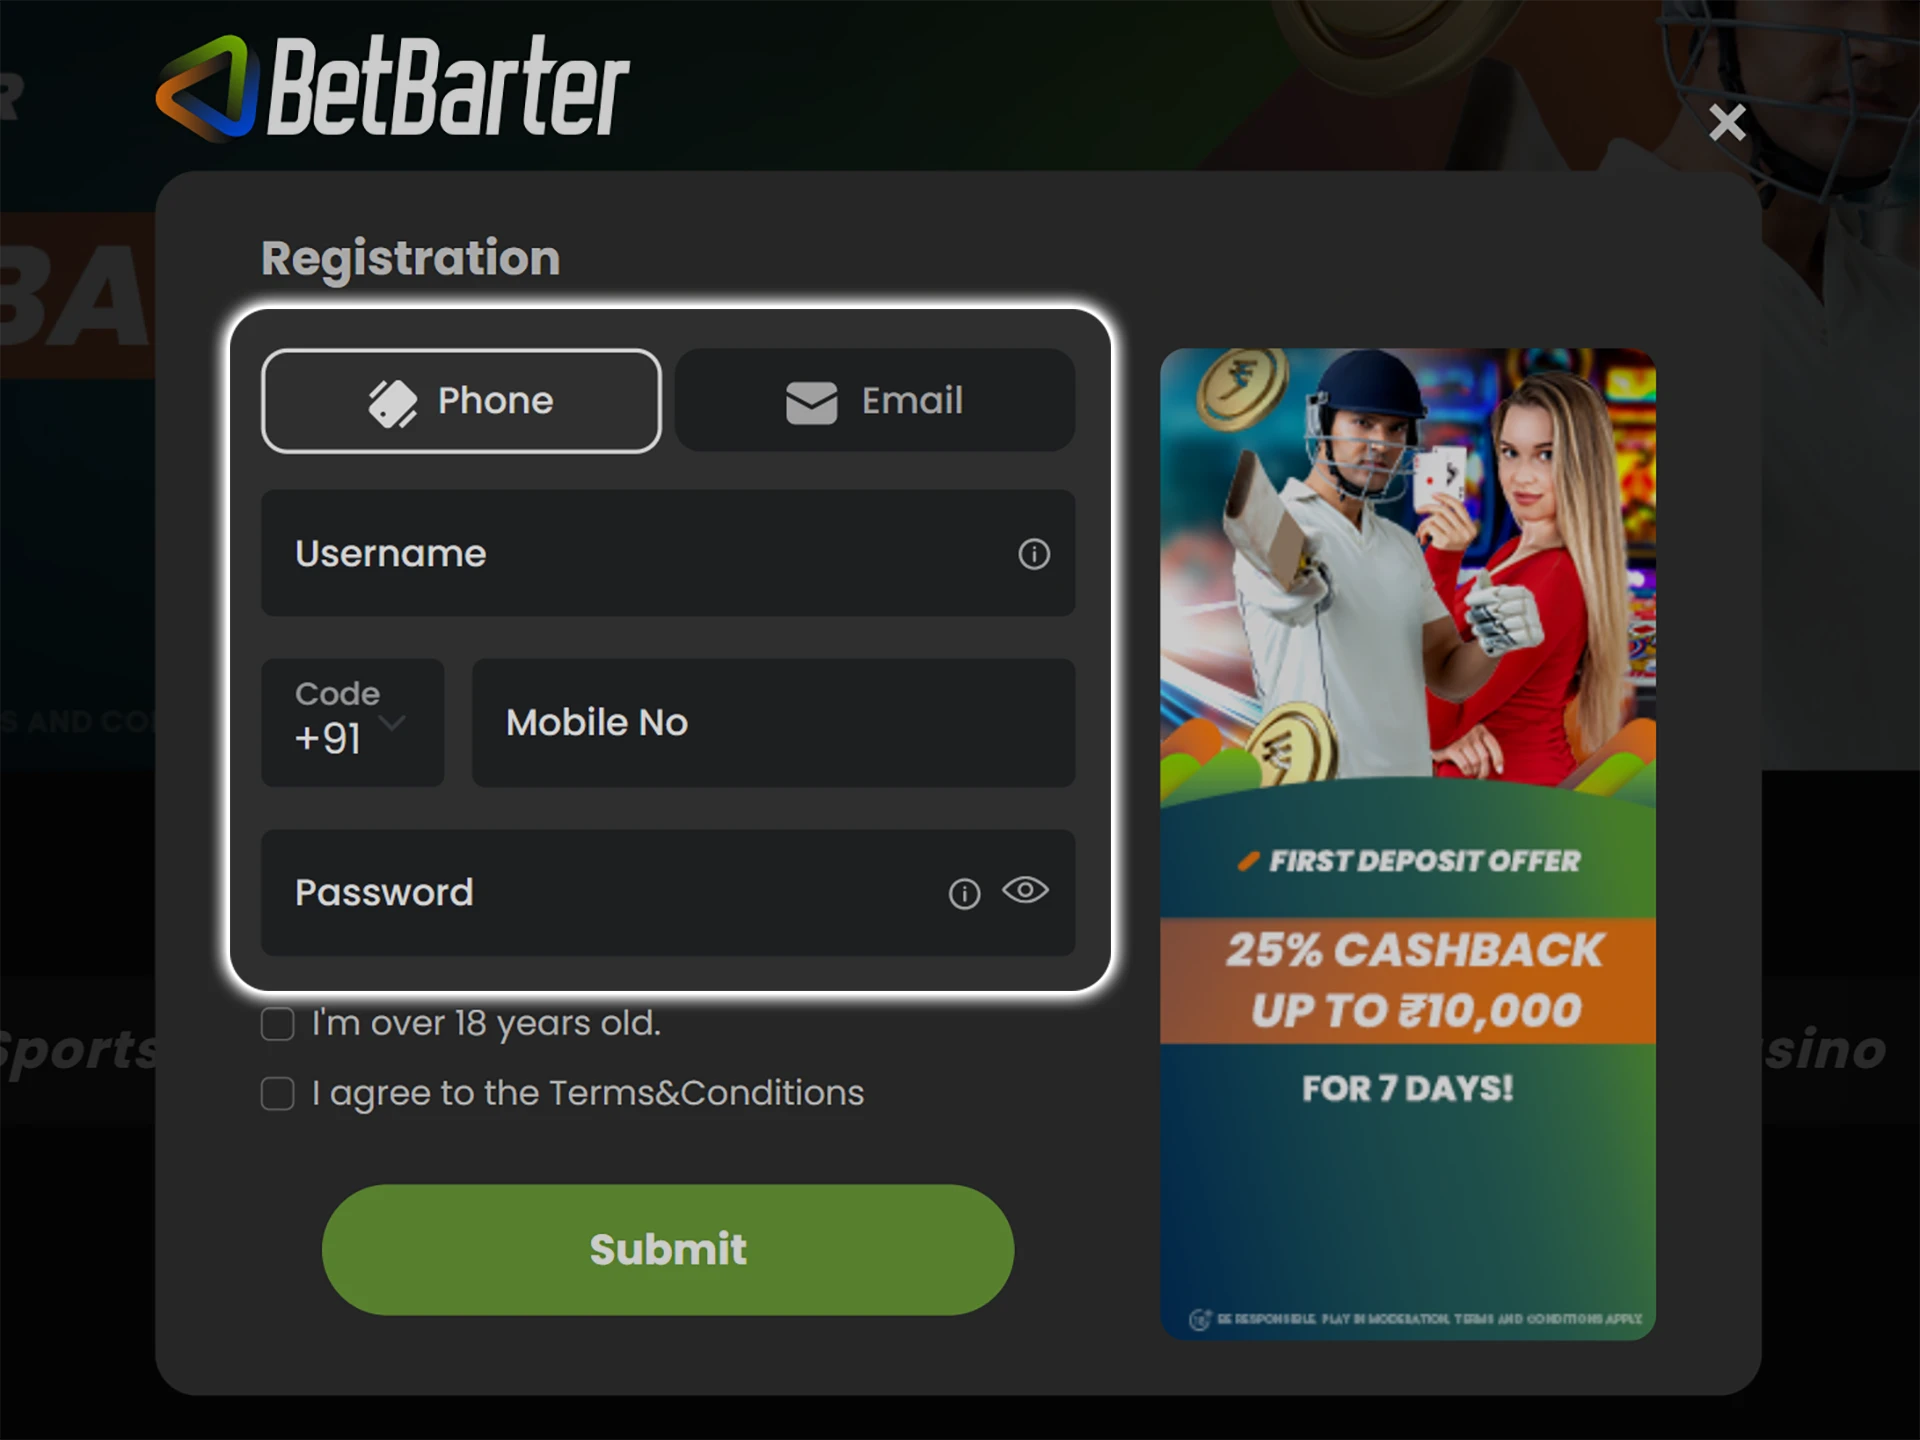 Choose a registration method and fill out the Betbarter form.